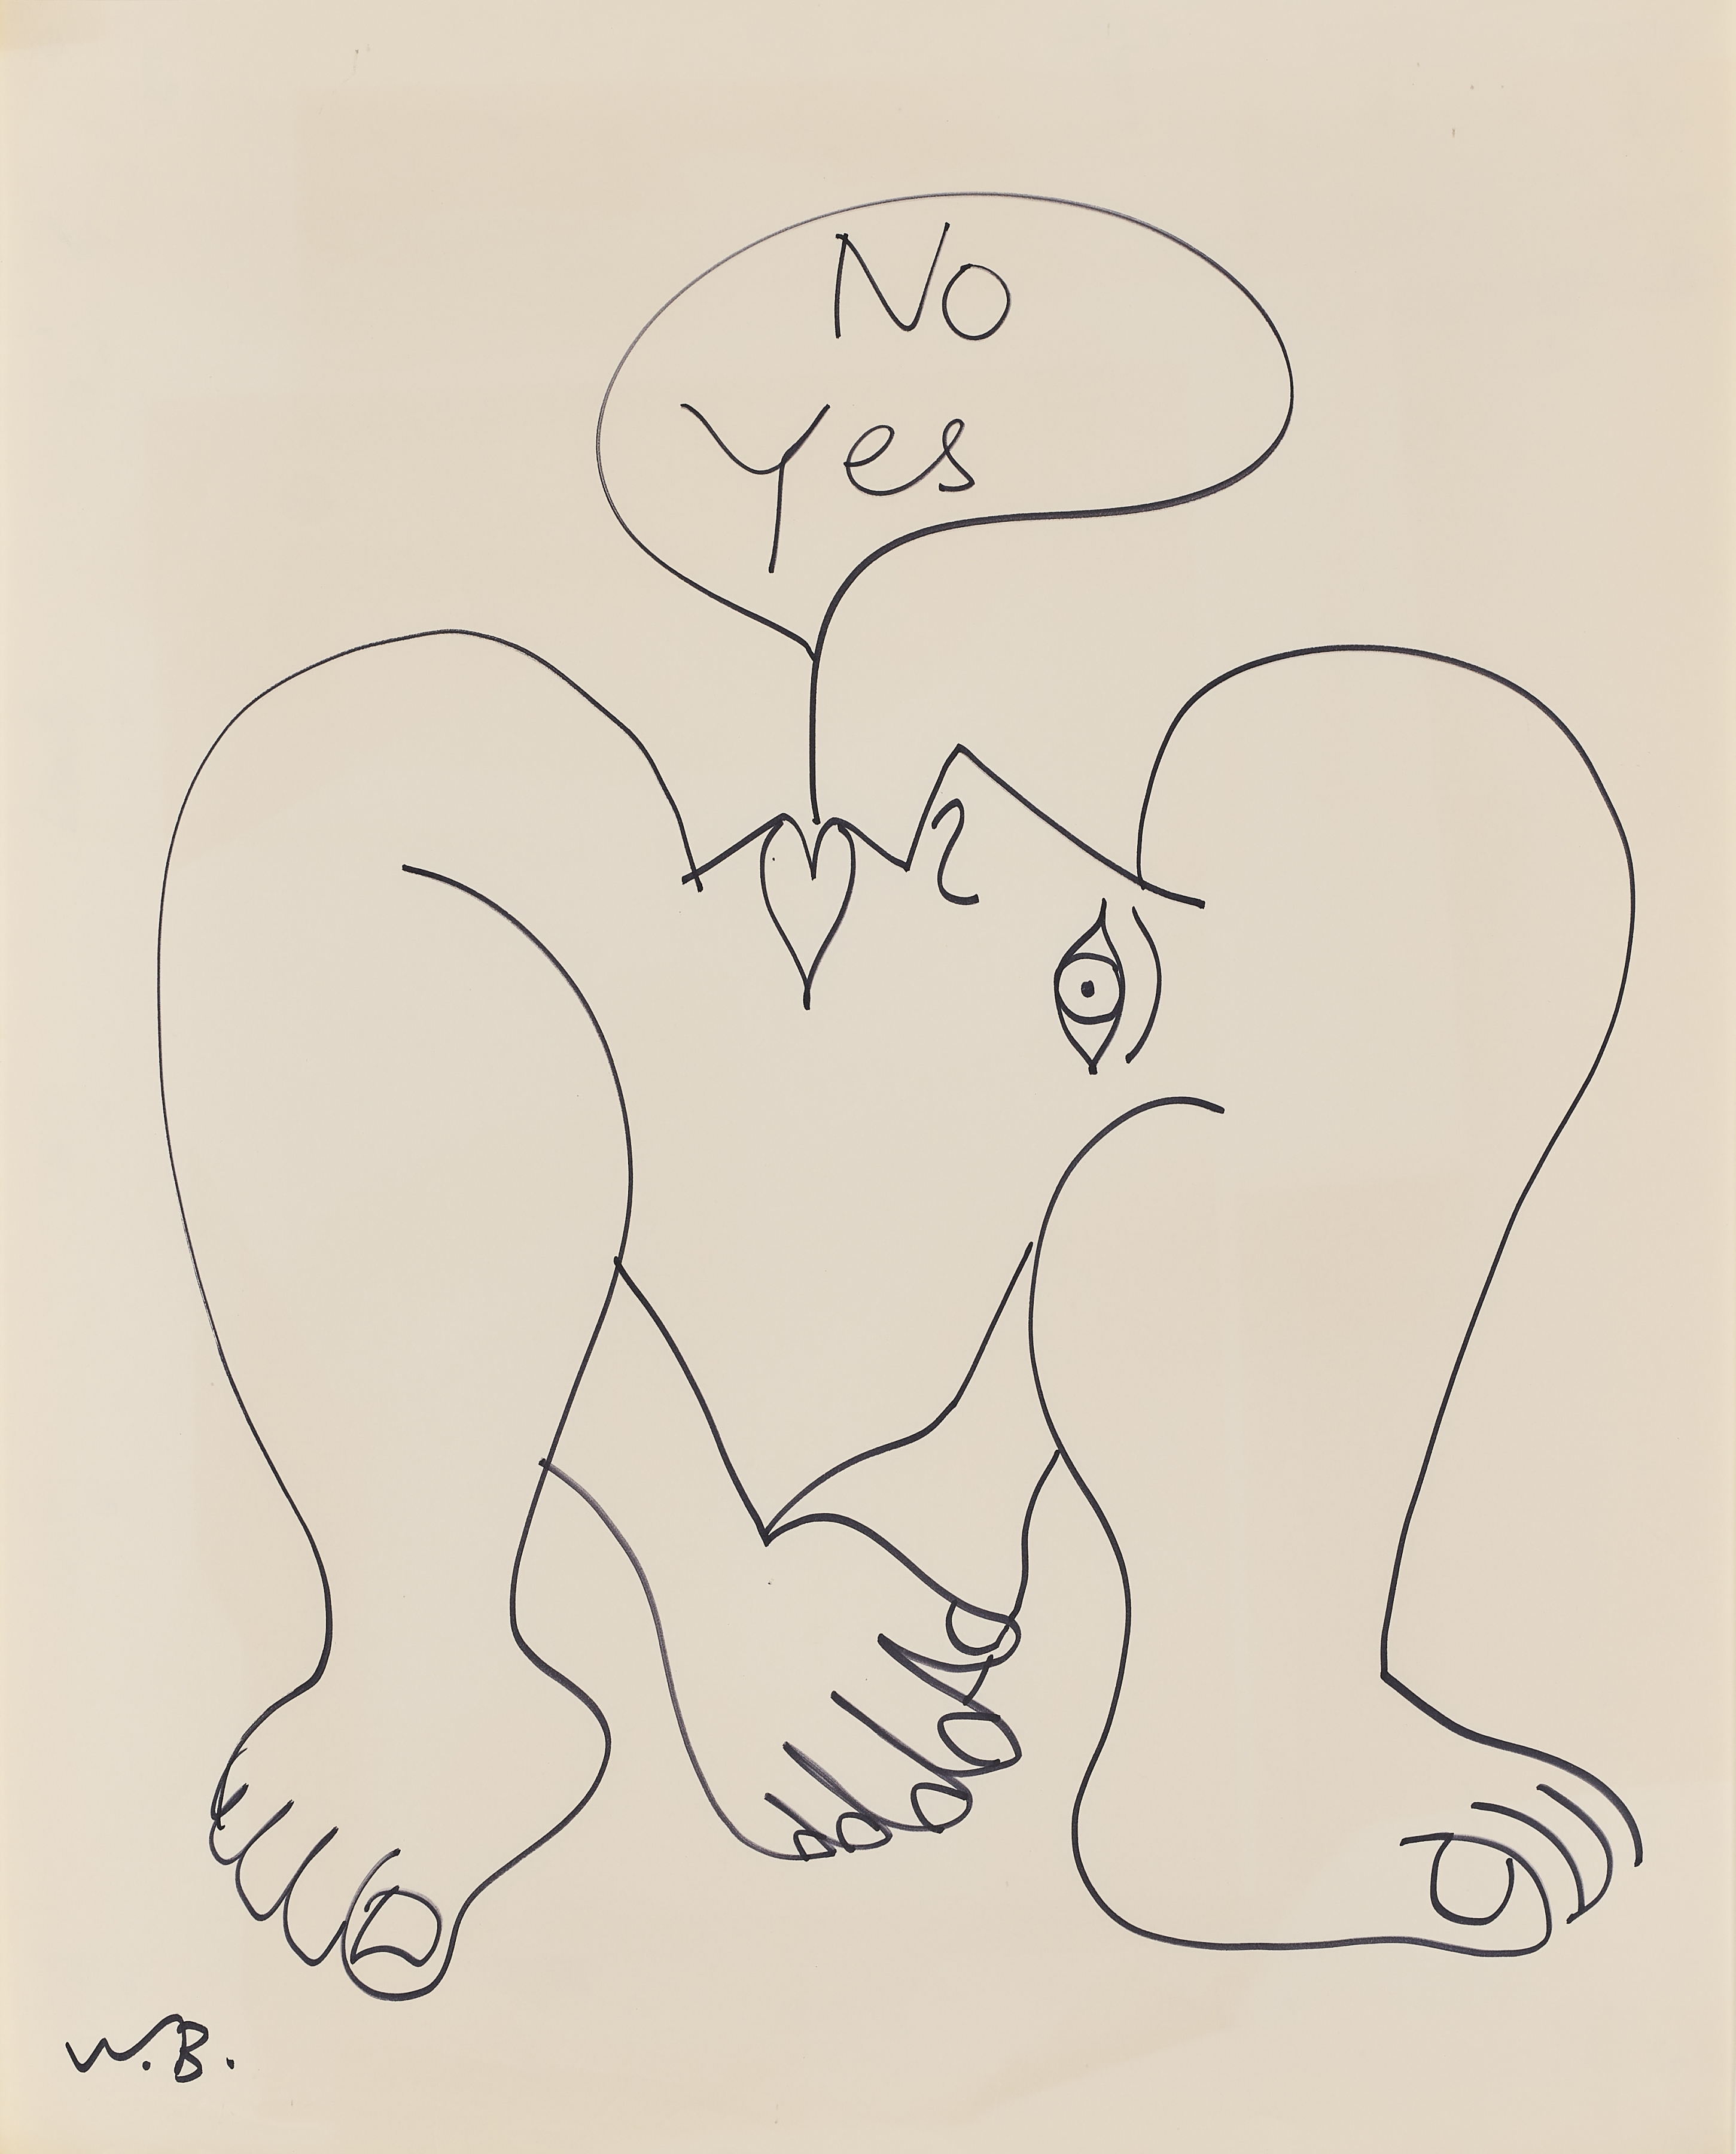 Walter Battiss

Untitled (No Yes, hand over hand, below profile), 1970

ink on paper

80 x 64 cm (31.5 x 25.2 in)

Enquire